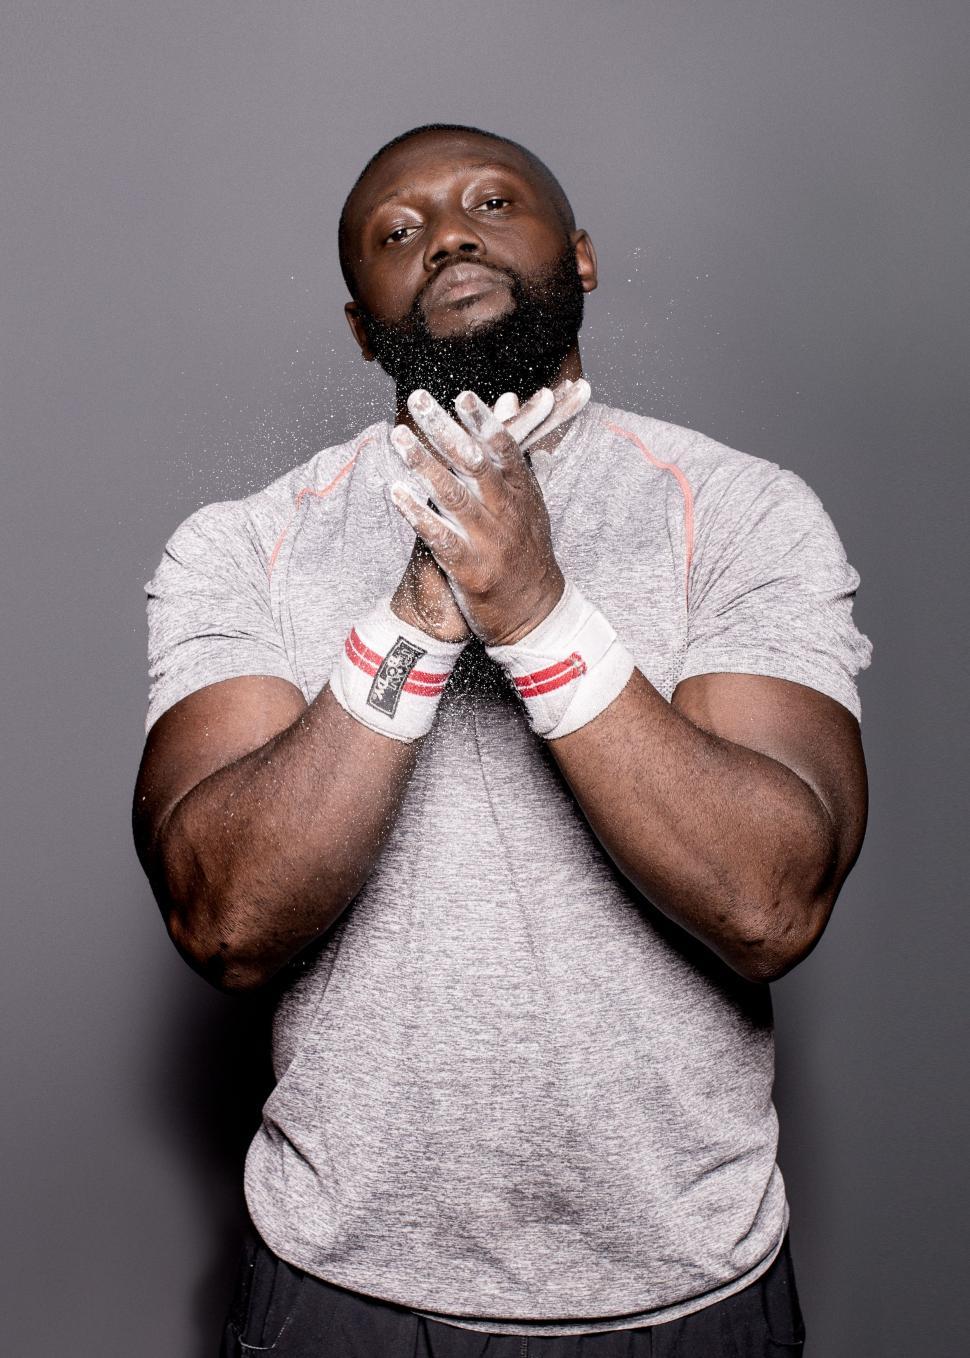 Free Image of Black Man With Beard and Wrist Bands 